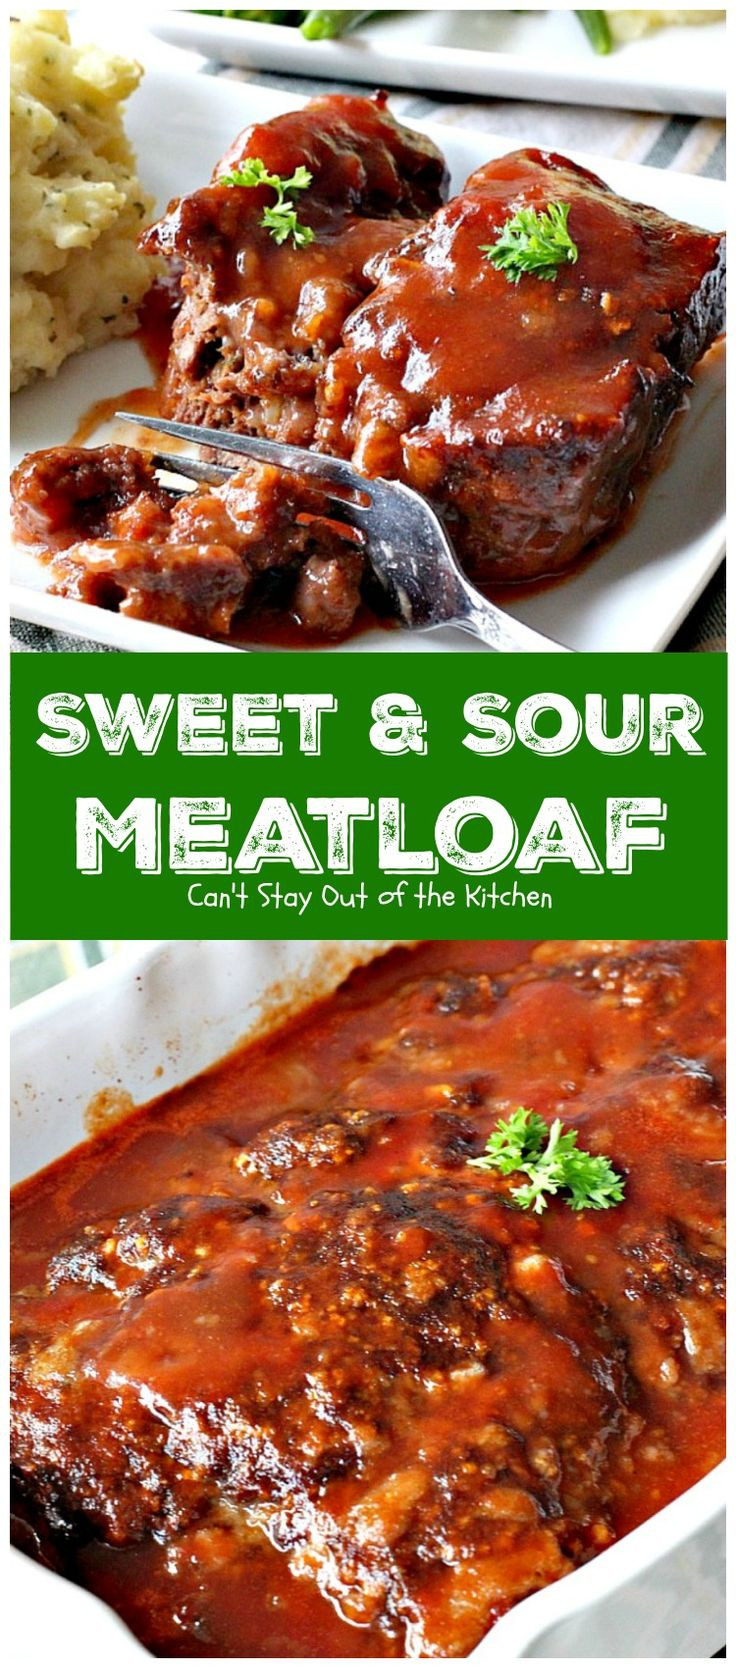 Meatloaf Recipe With Bread Crumbs
 The 25 best Clean eating meatloaf ideas on Pinterest